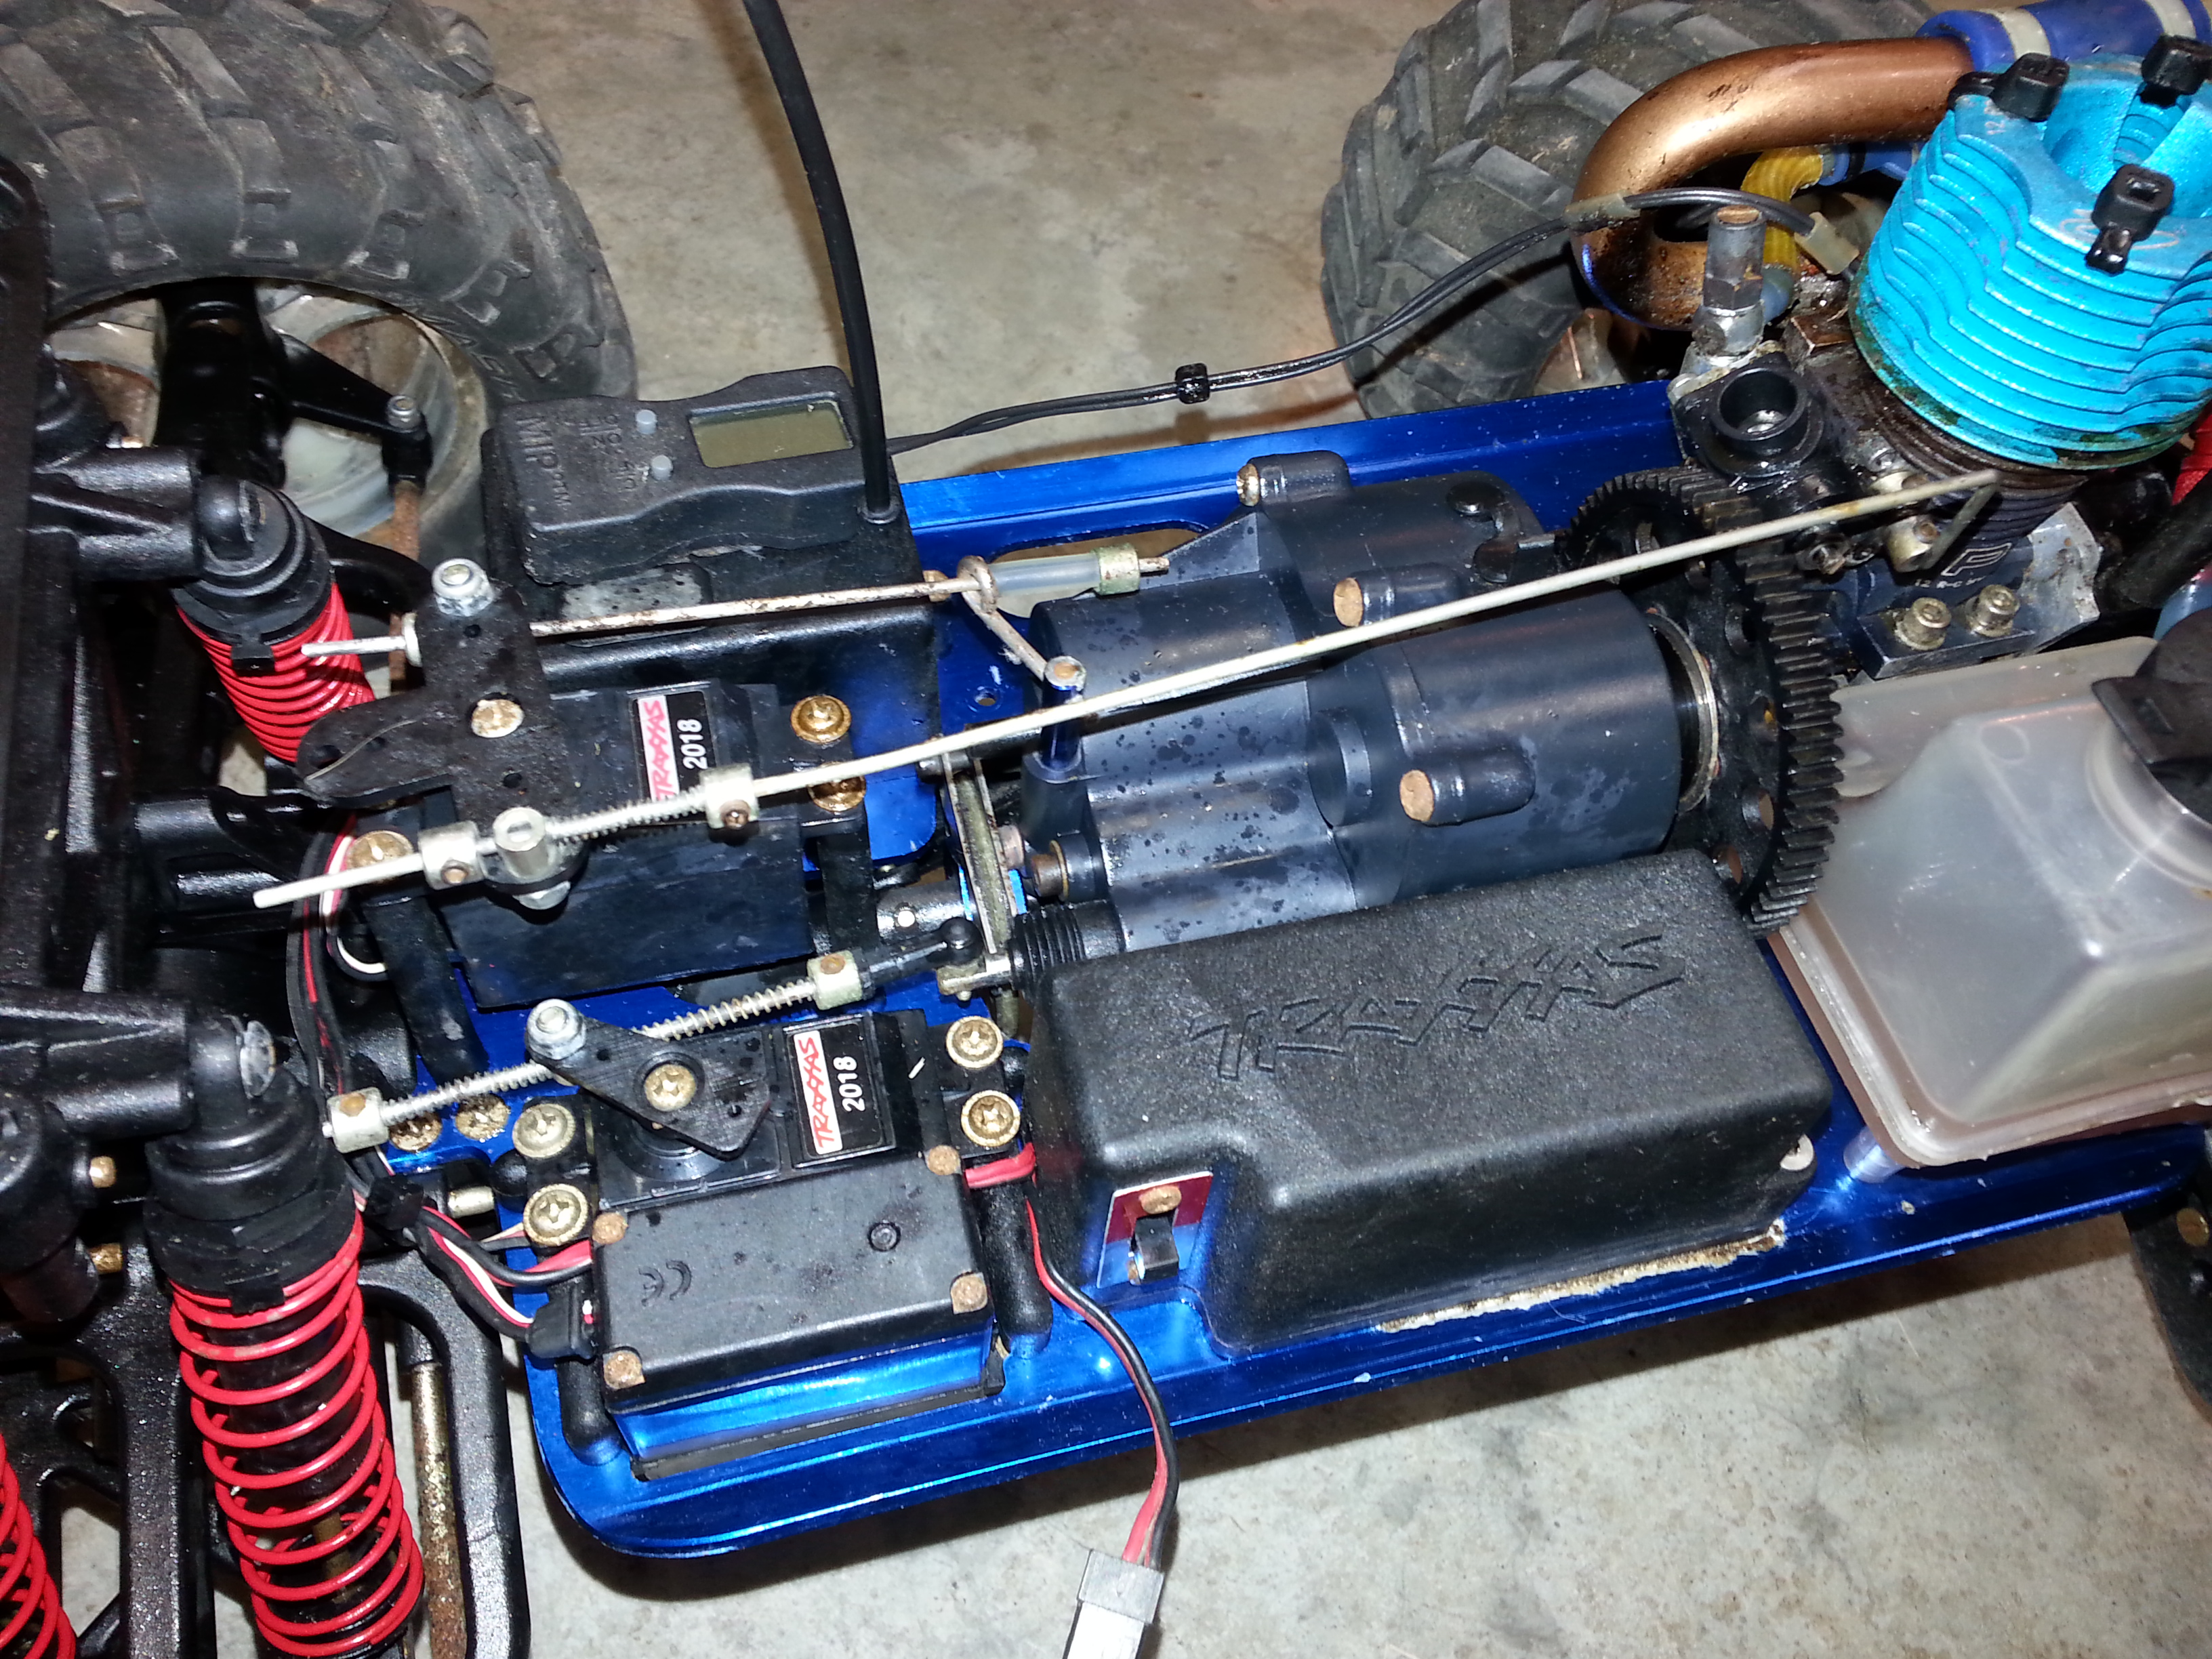 I was given a T-Maxx truck please help! - RCU Forums